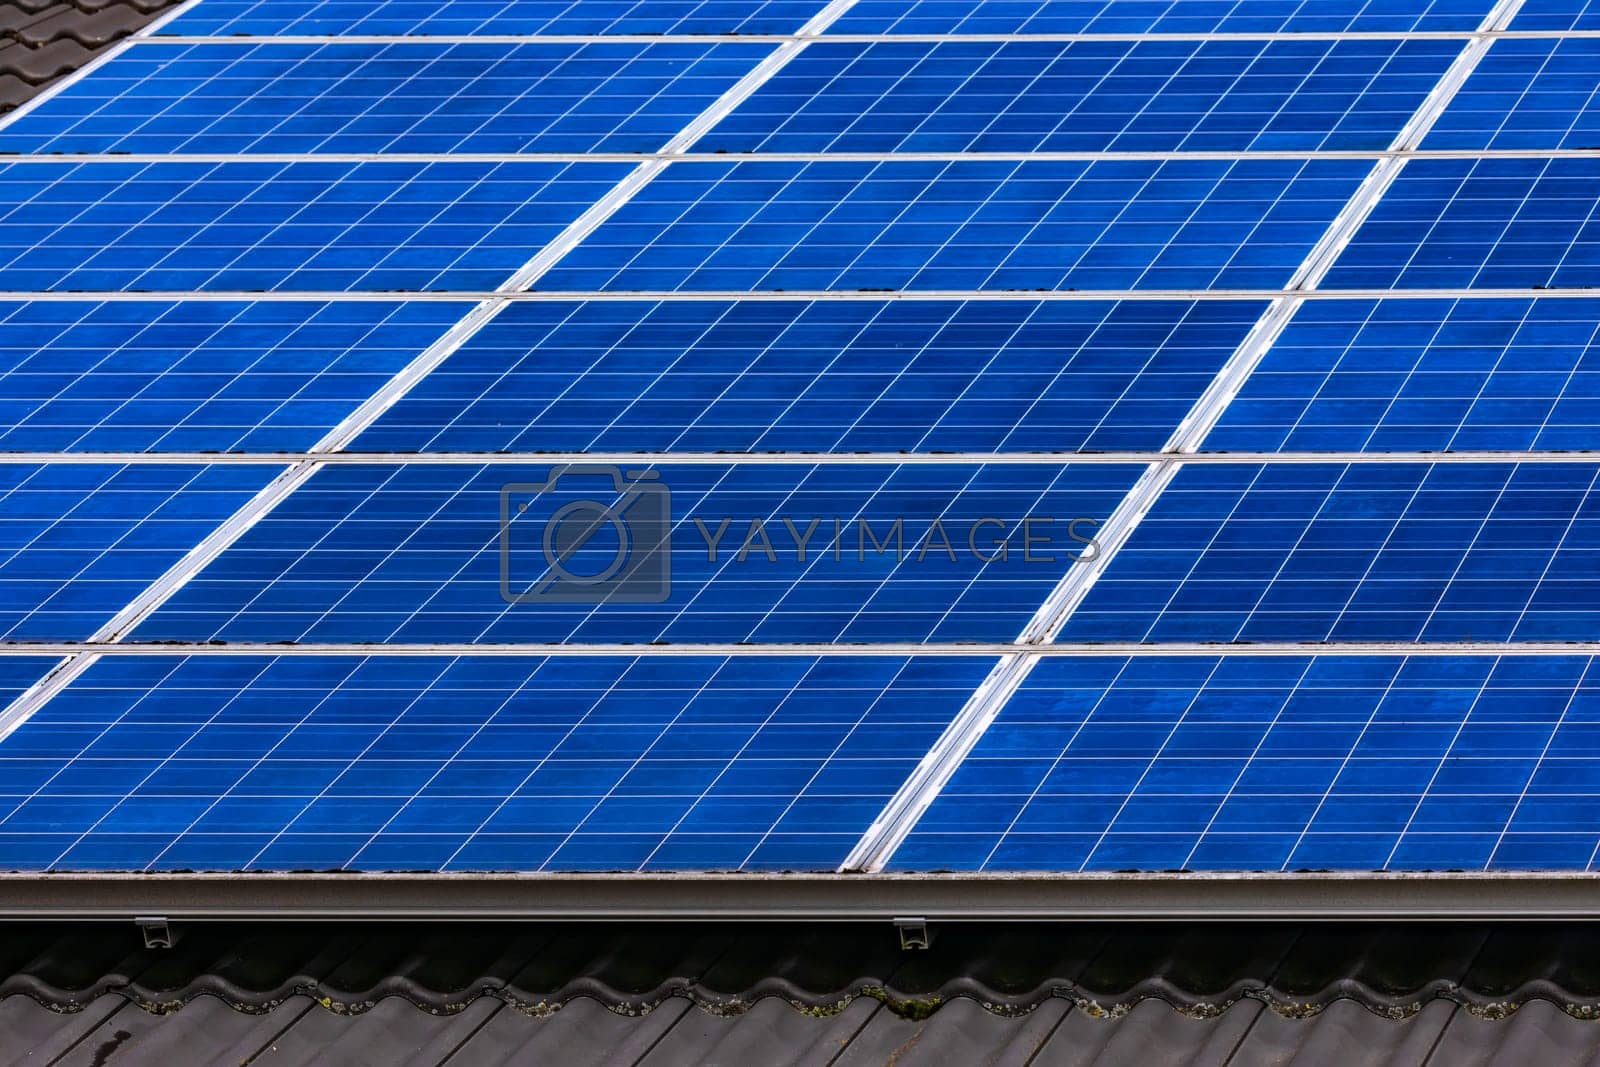 Royalty free image of Solar panels for renewable power generation by astrosoft